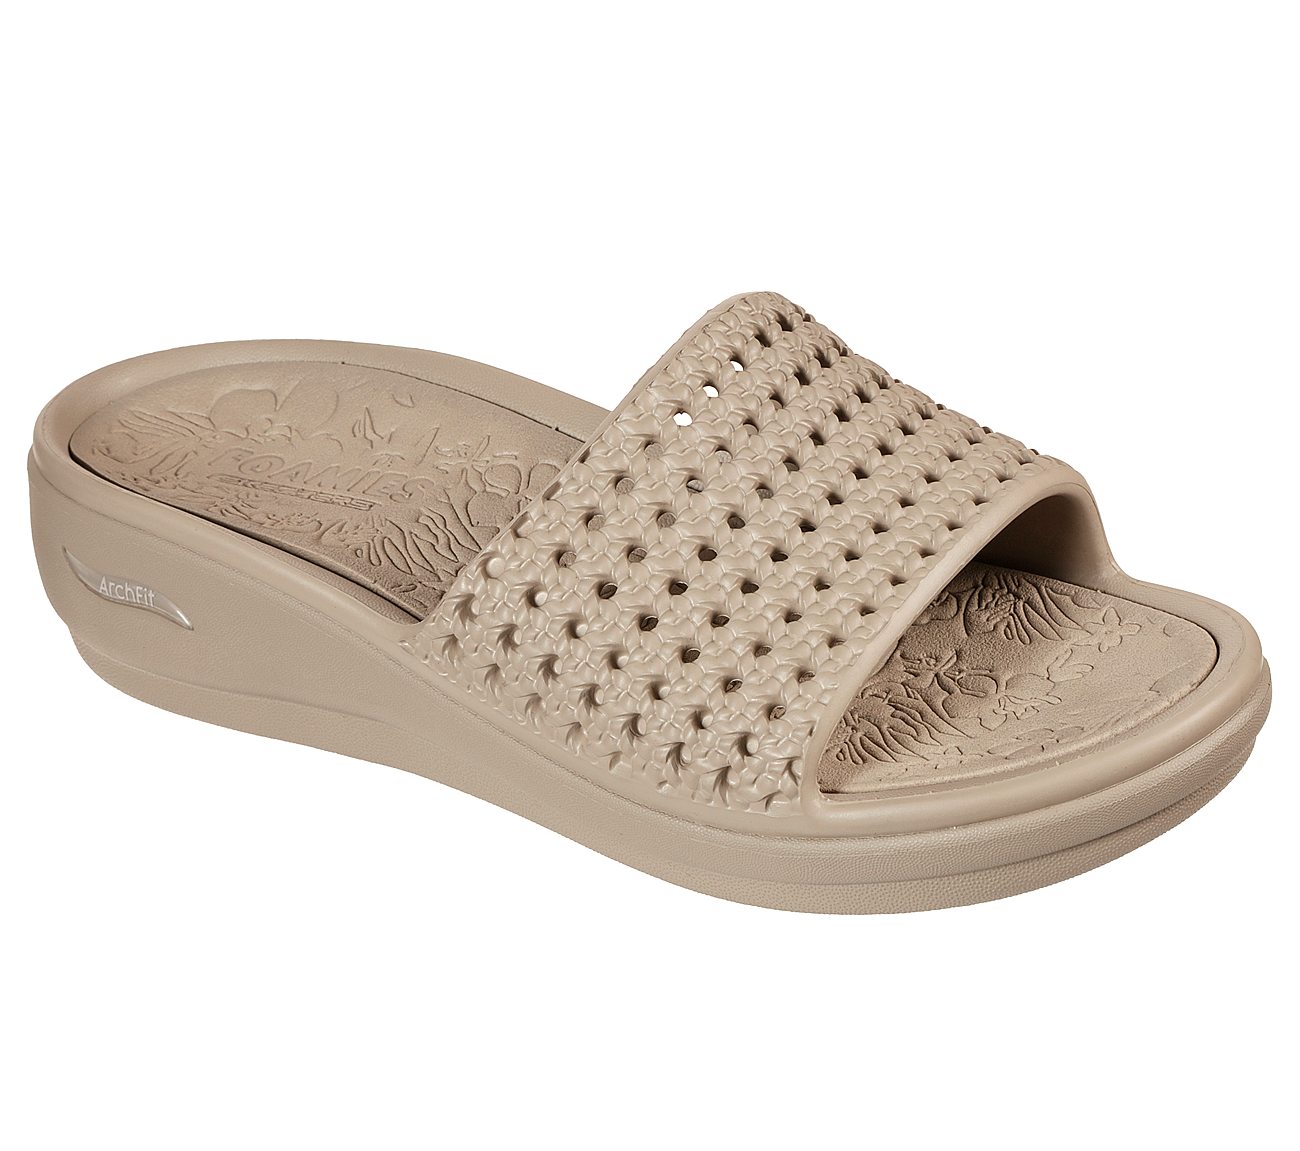 ARCH FIT ASCEND - DARLING, TTAUPE Footwear Lateral View